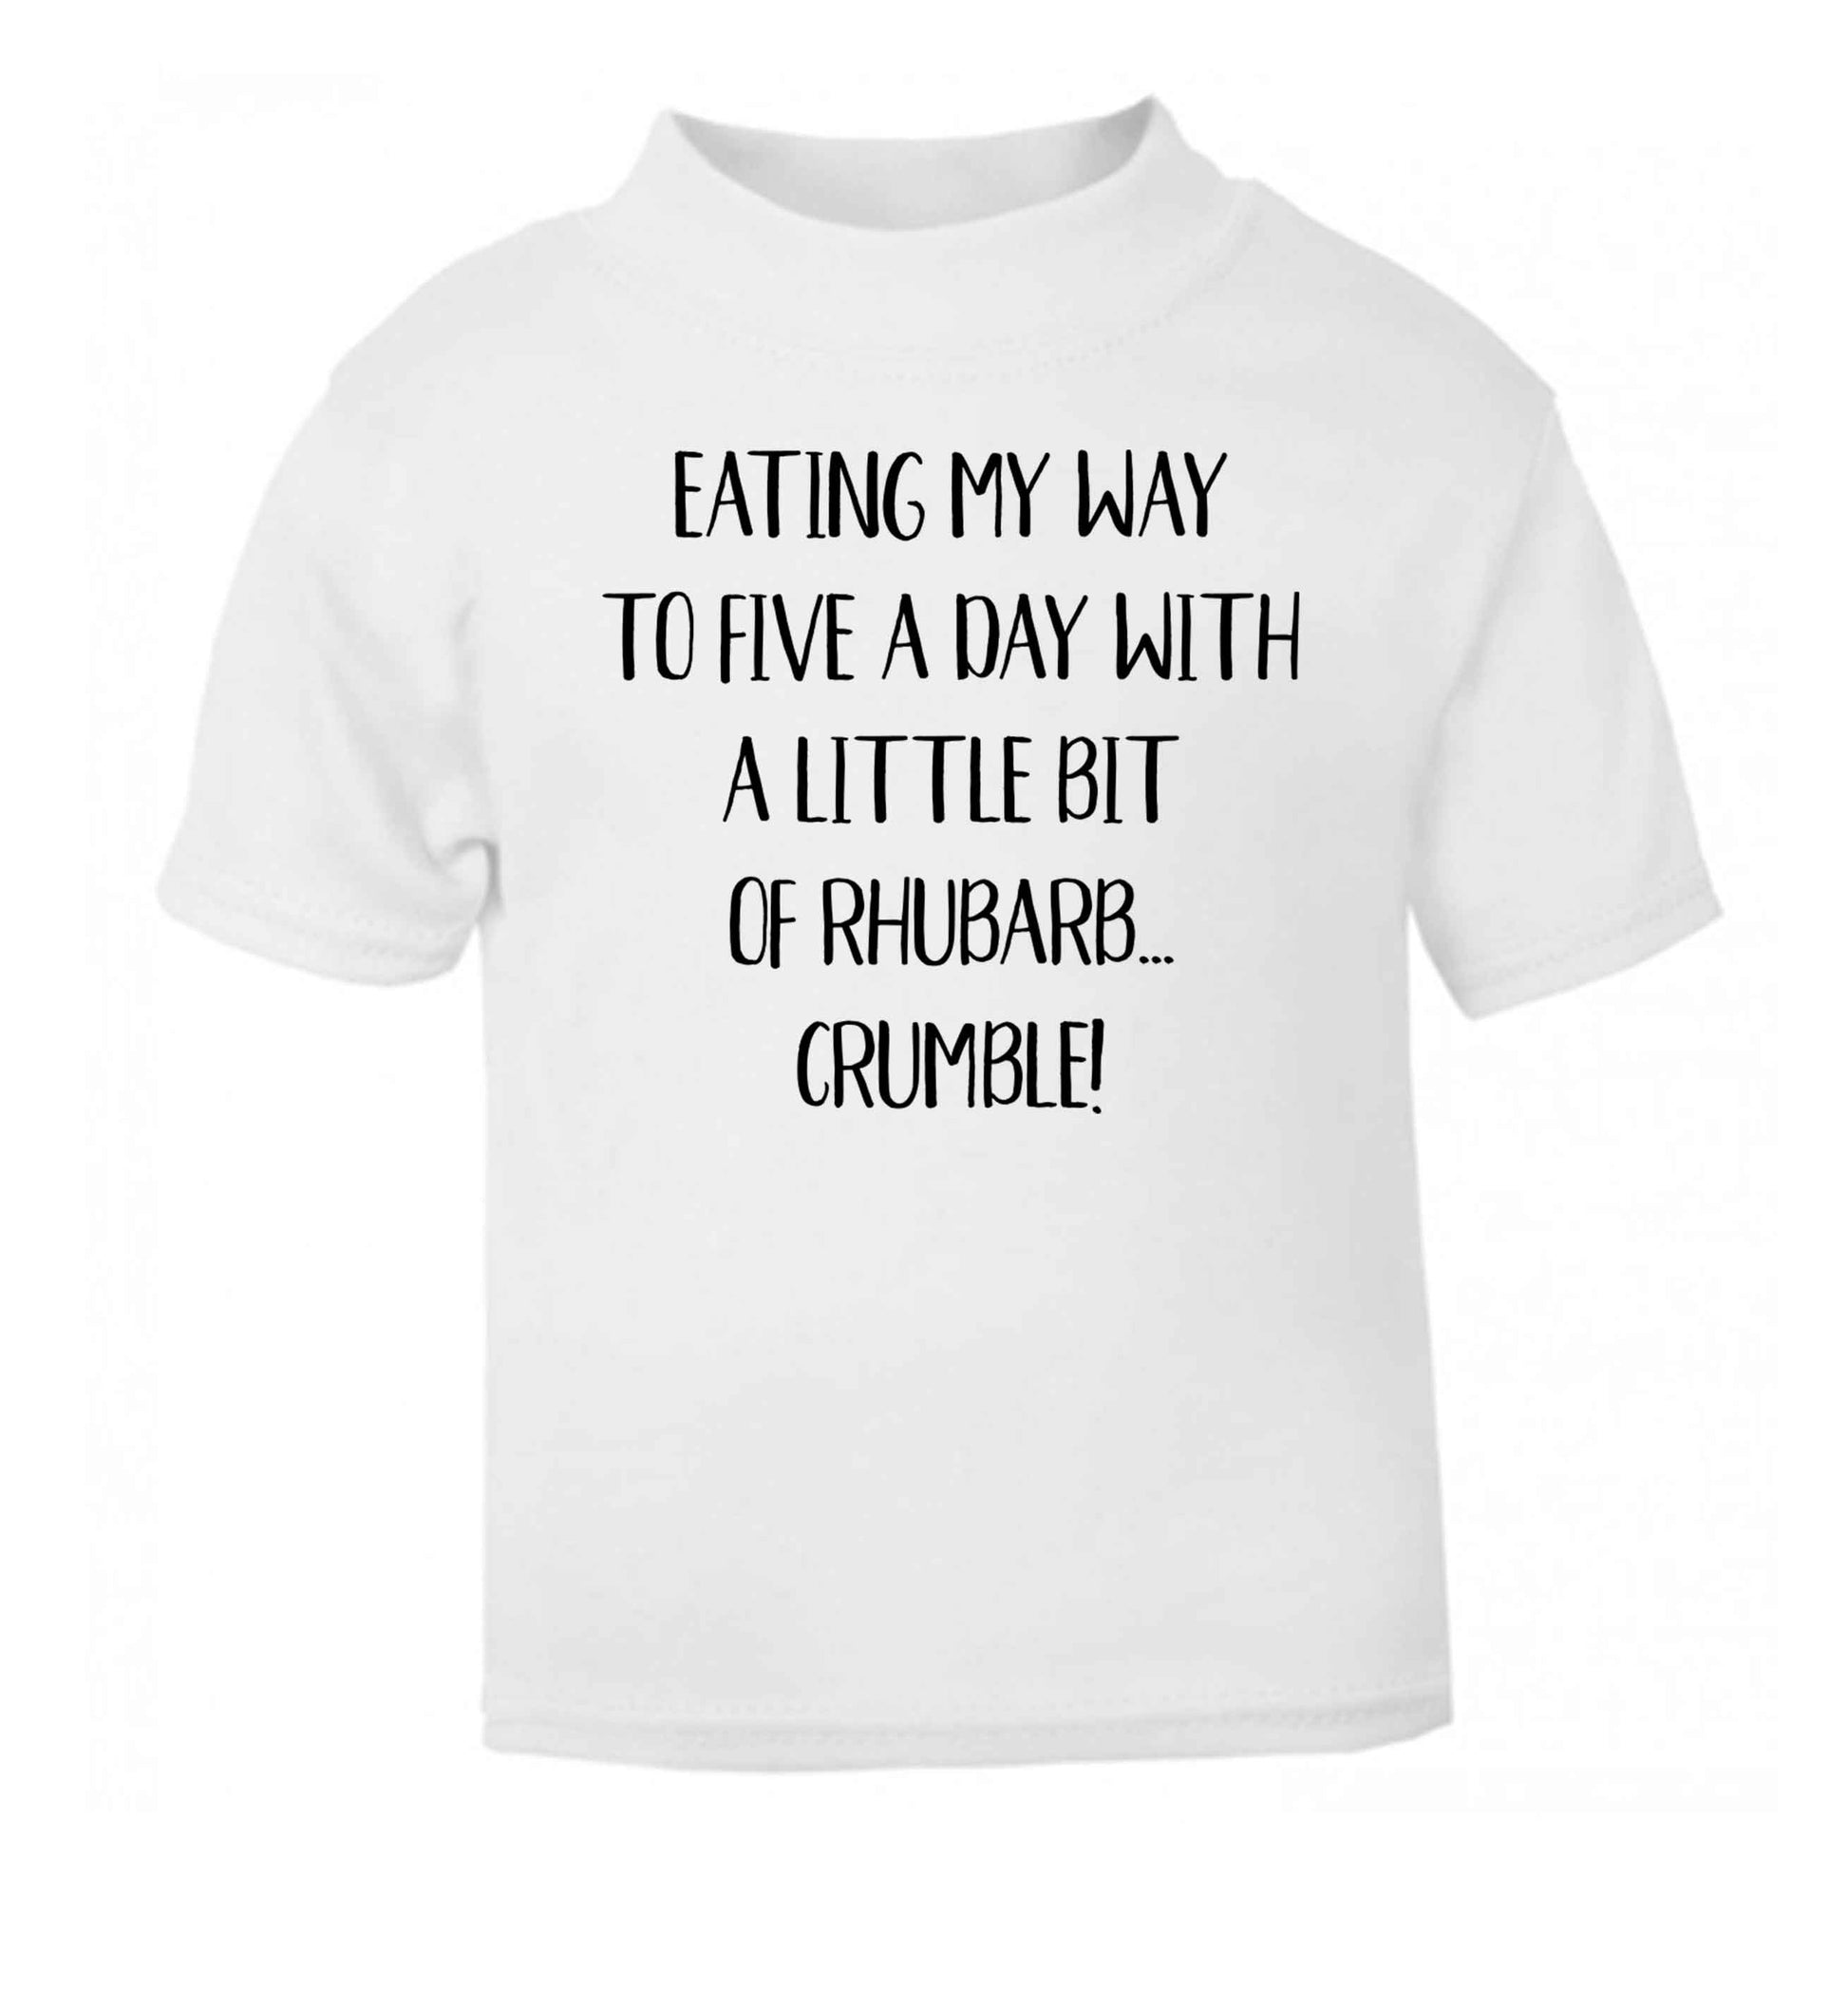 Eating my way to five a day with a little bit of rhubarb crumble white Baby Toddler Tshirt 2 Years